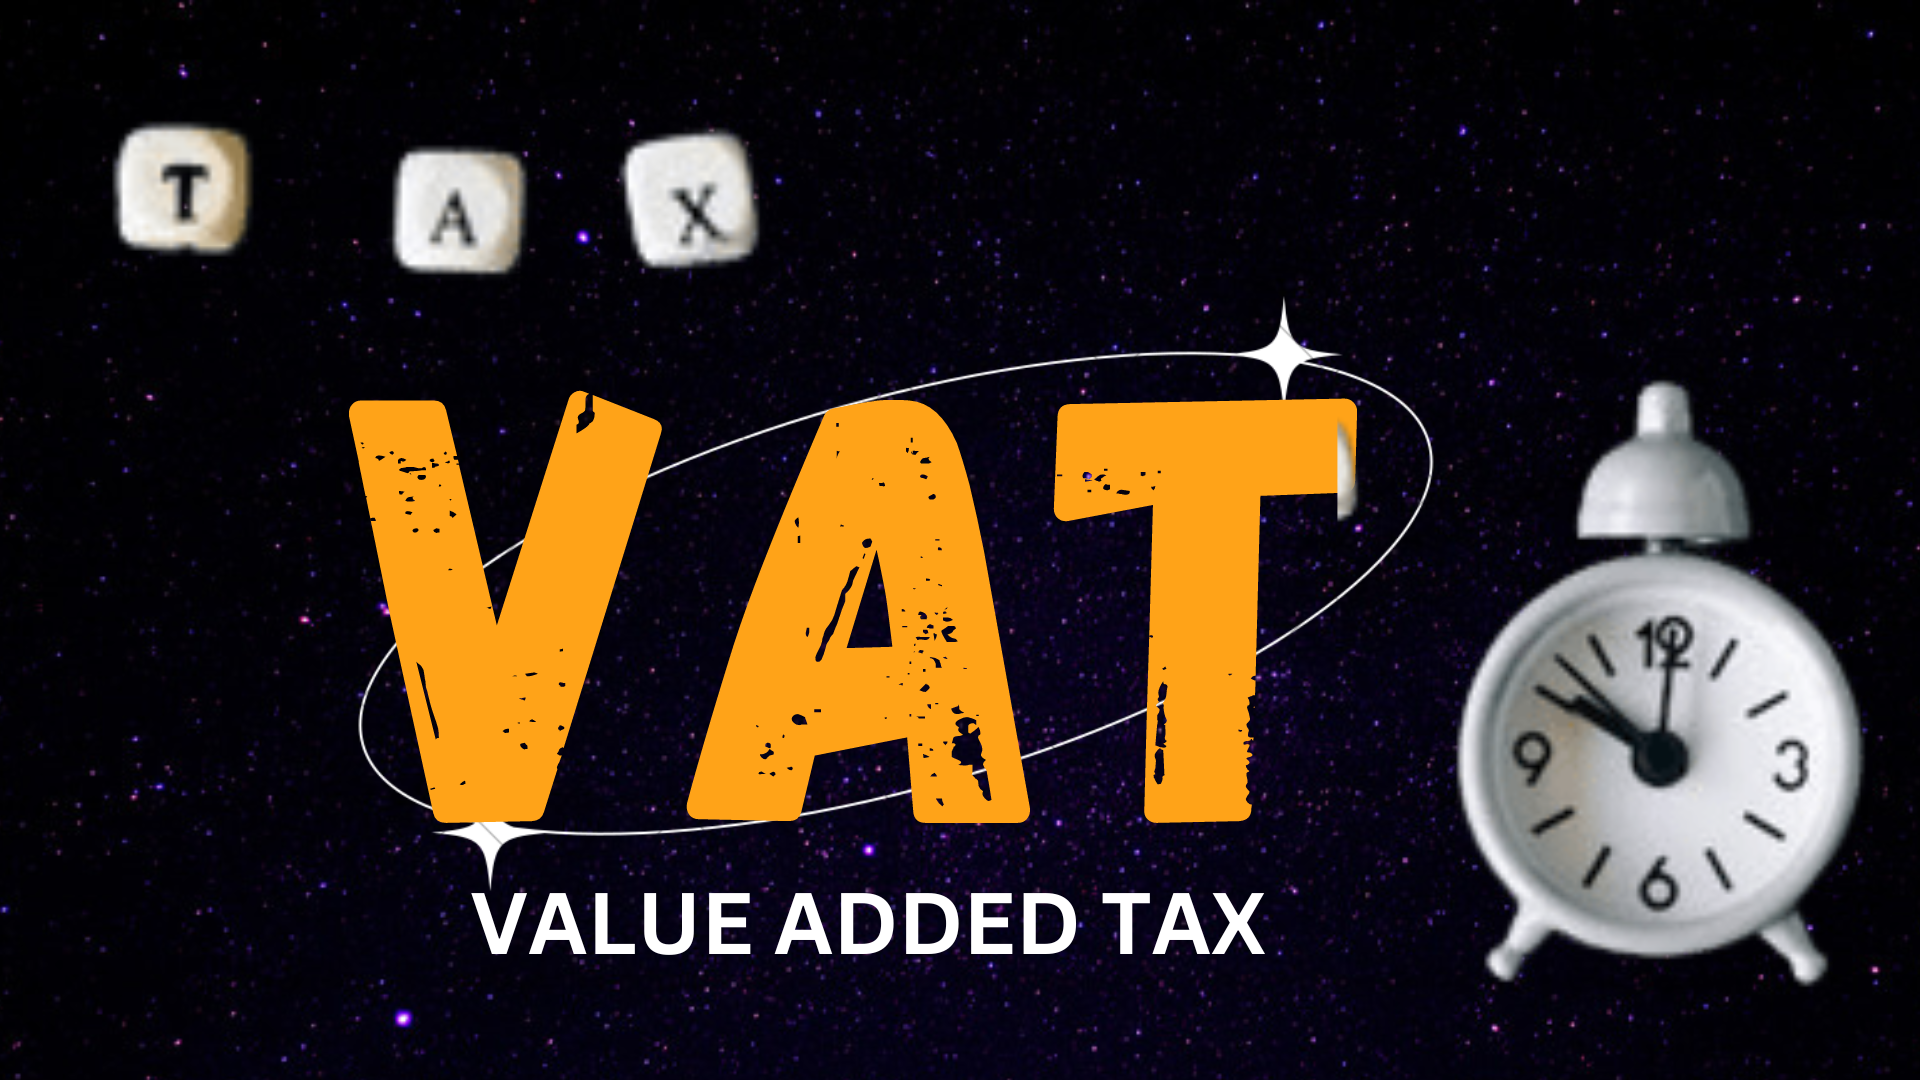 Time of supply for Deal on returnable present or Cheerful readiness Deal underneath VAT in UAE